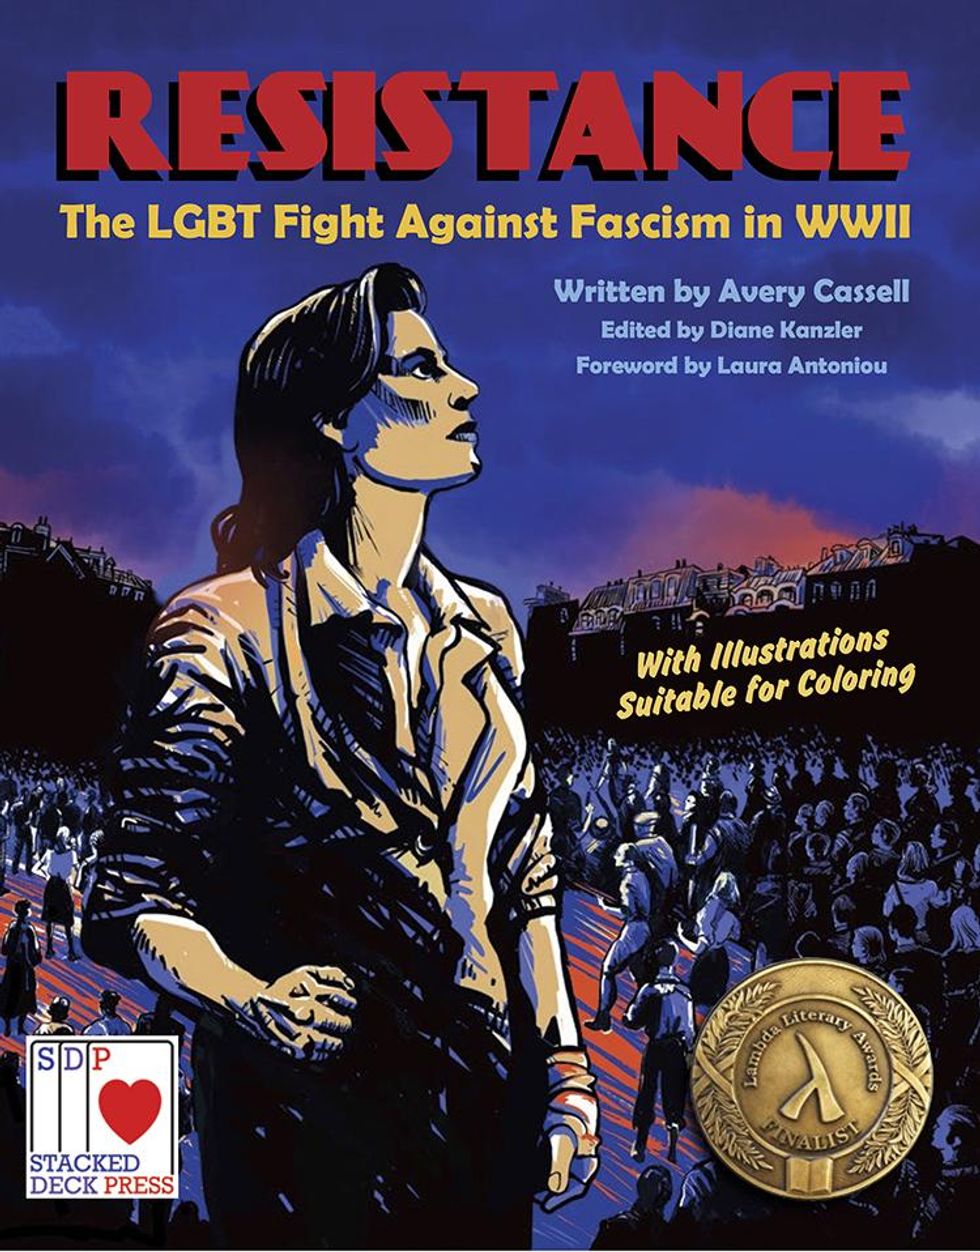 Cover of Resistance: The LGBT Fight Against Fascism in WWII featuring woman resistance fighter